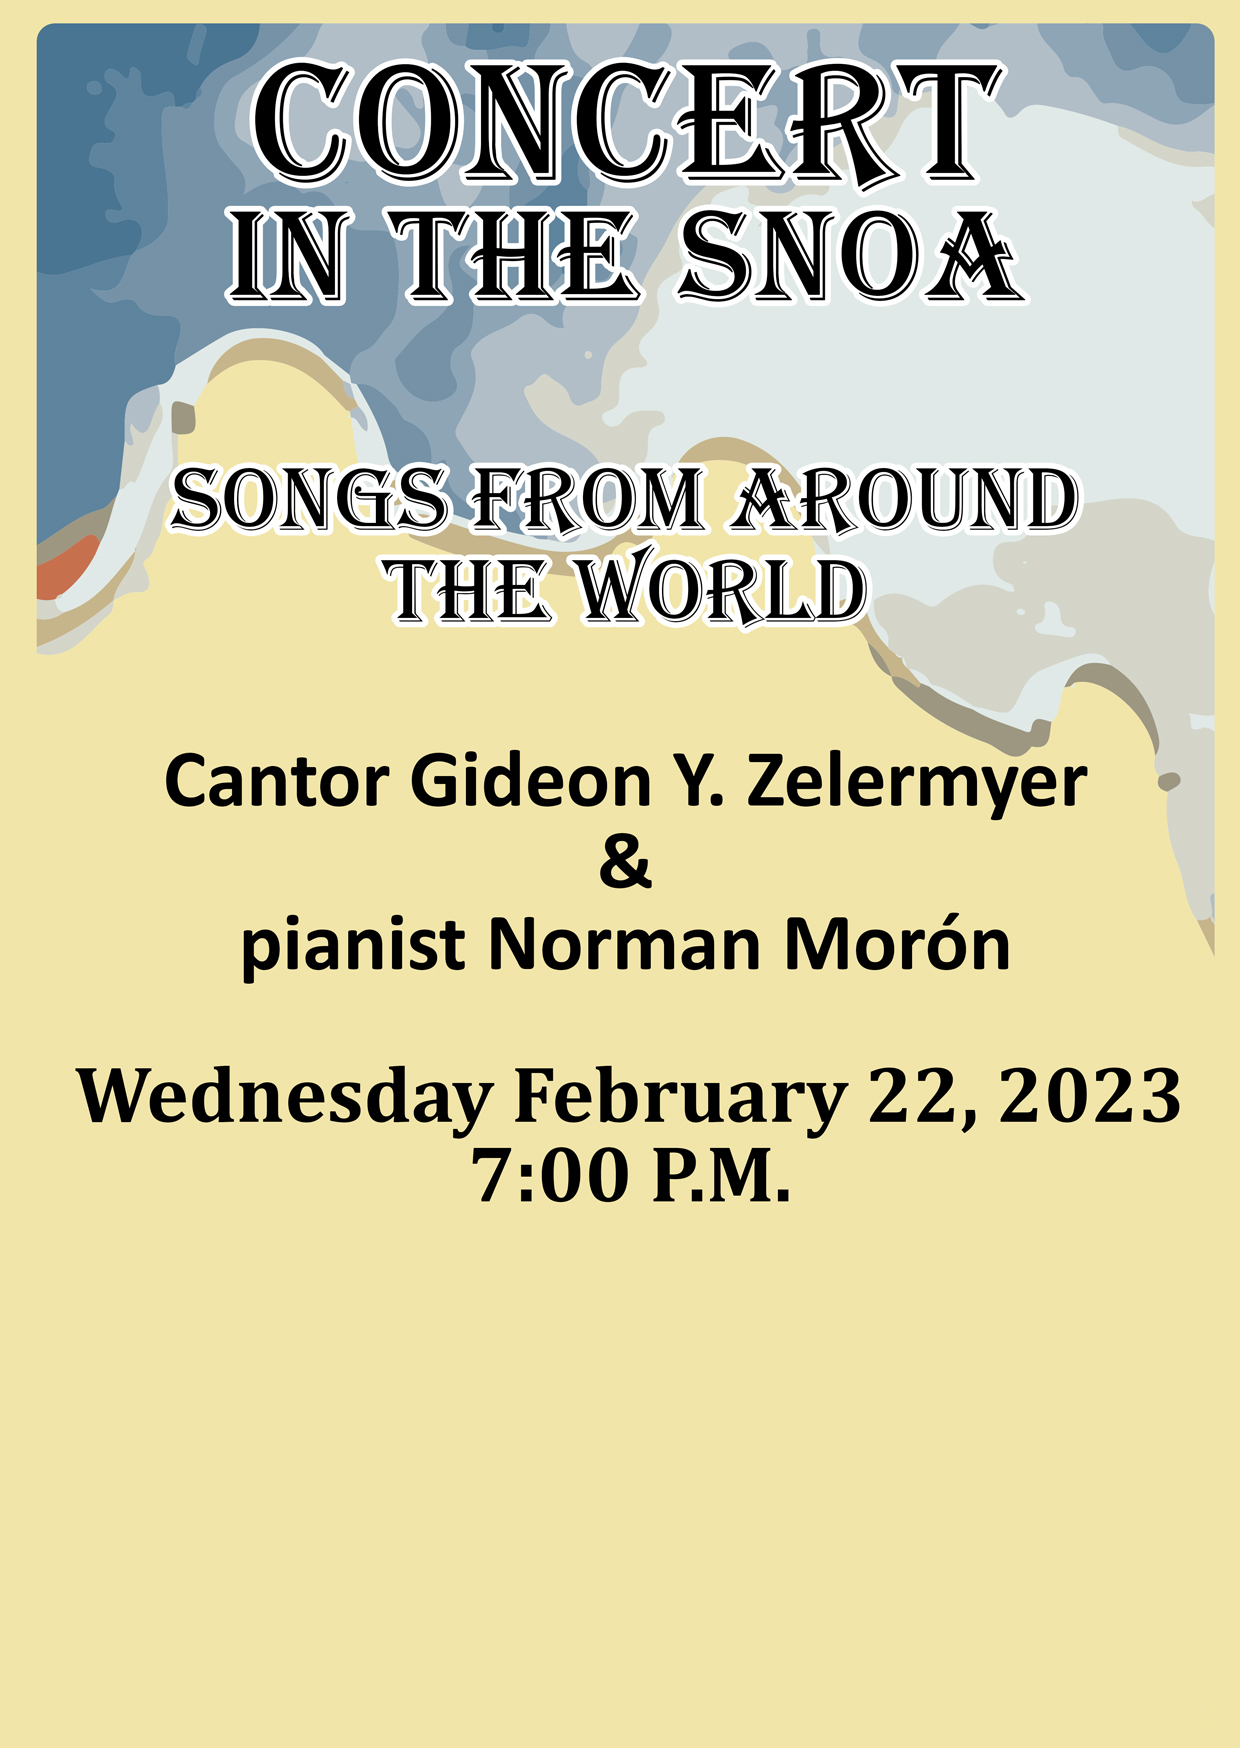 Concert in the snoa